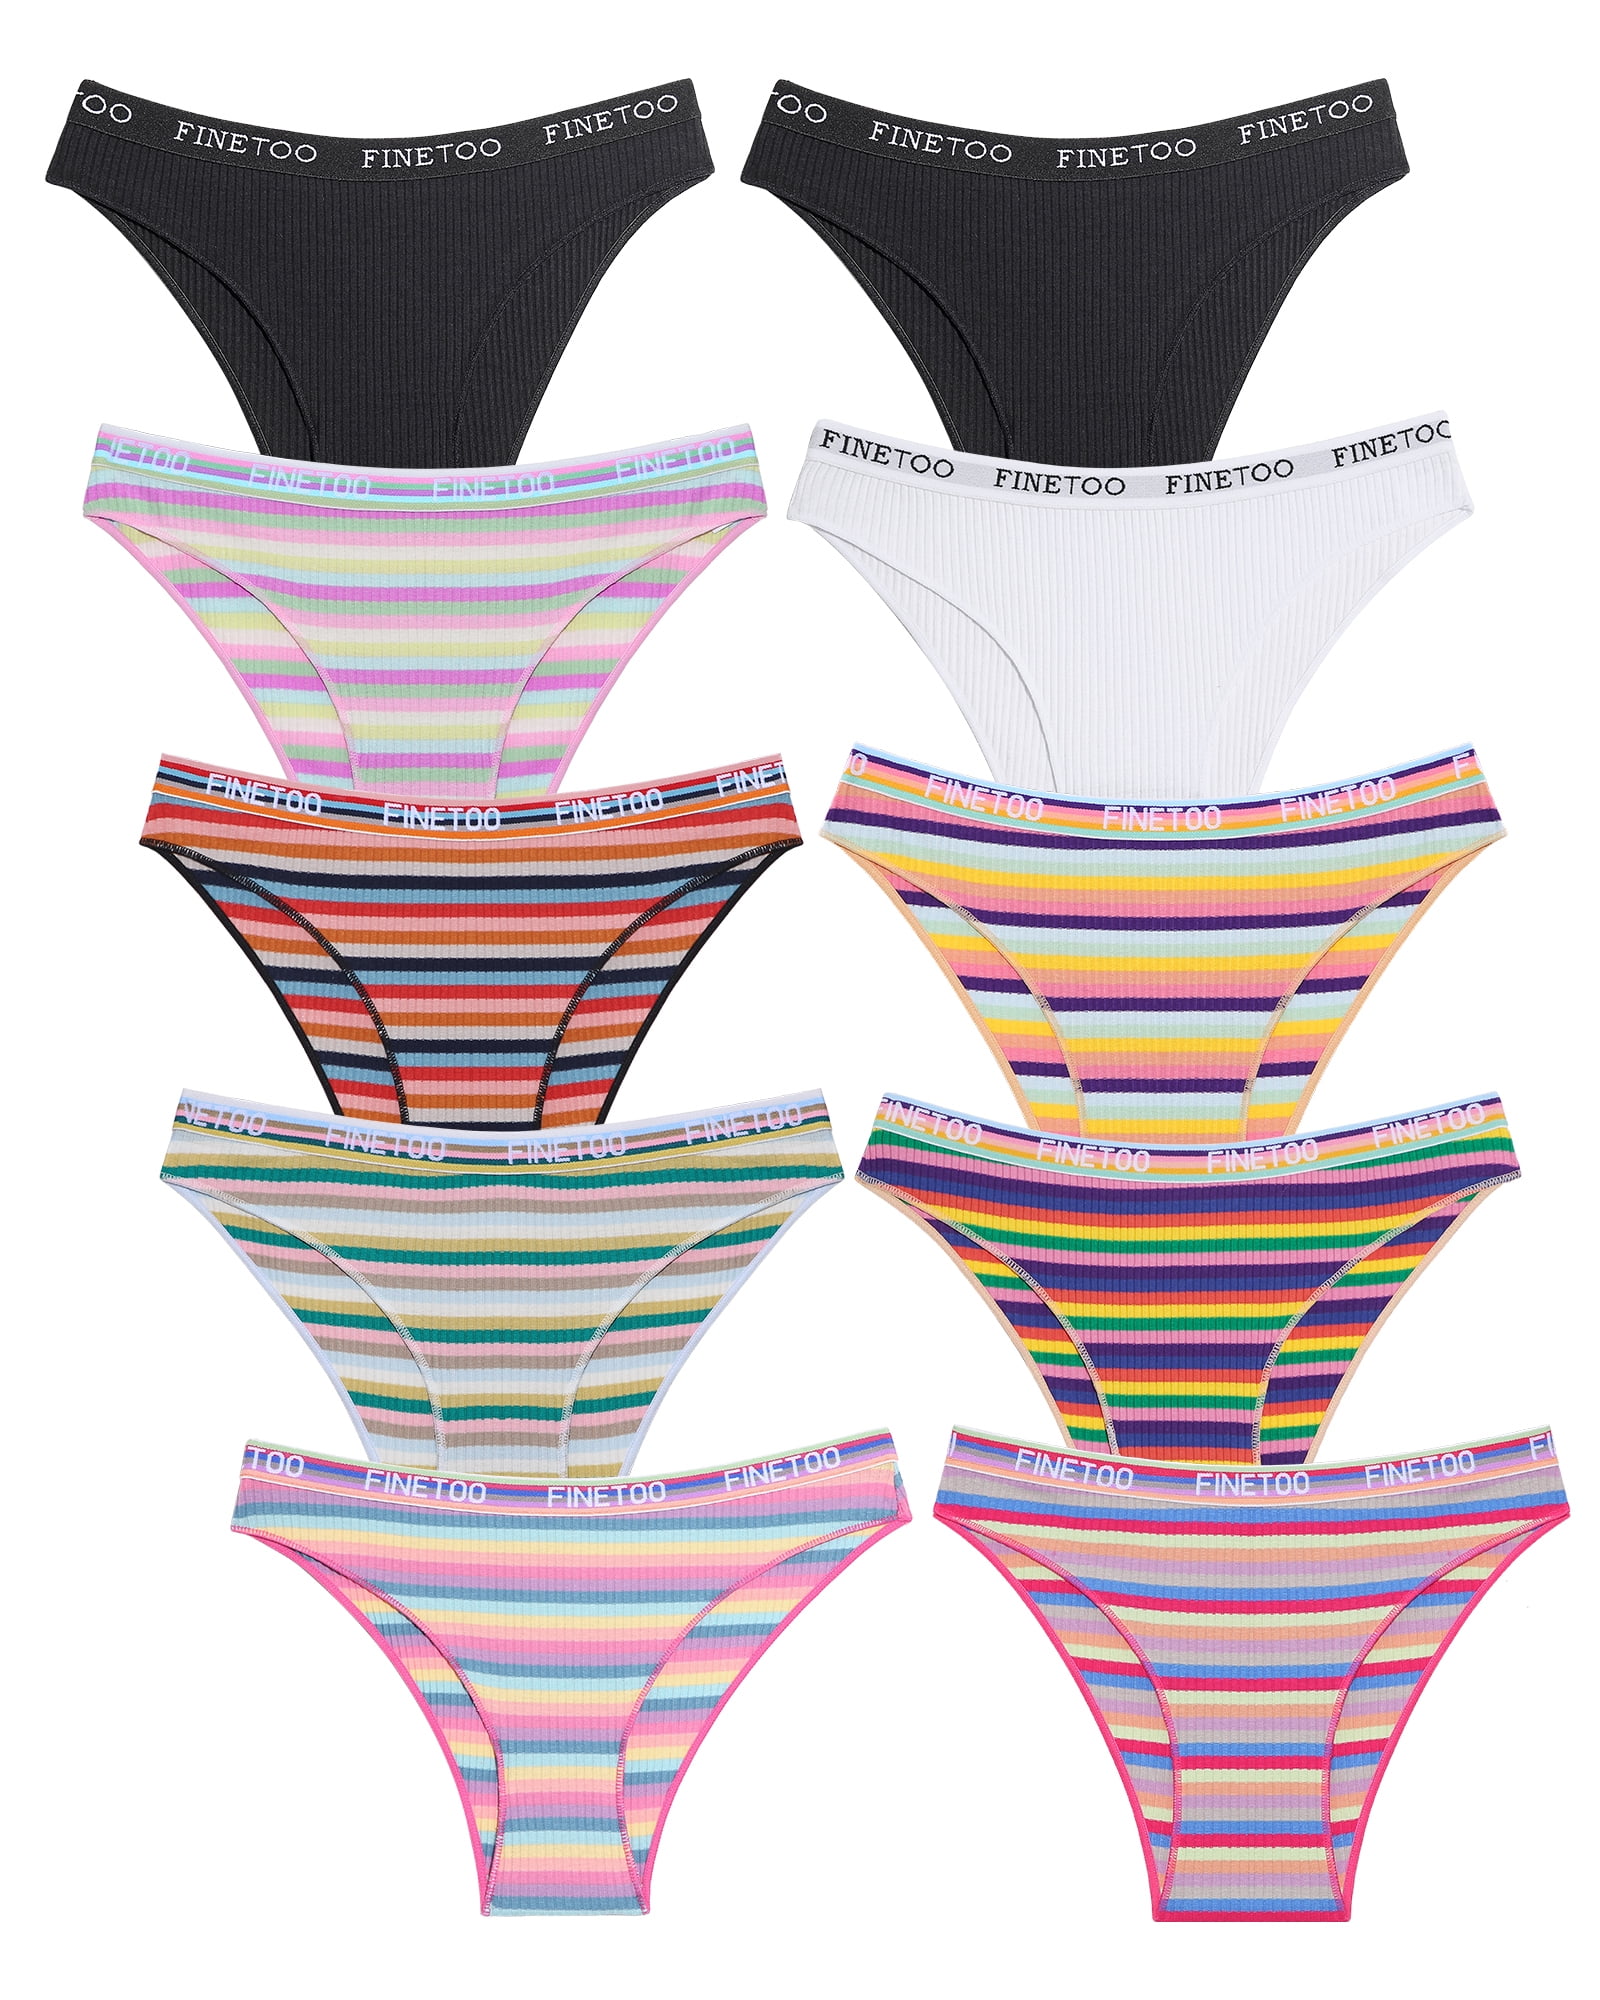 FINETOO 10 Pack Cotton Underwear for Women Cheeky High Cut Breathable  Hipster Bikini Striped Panties Pack S-XL 